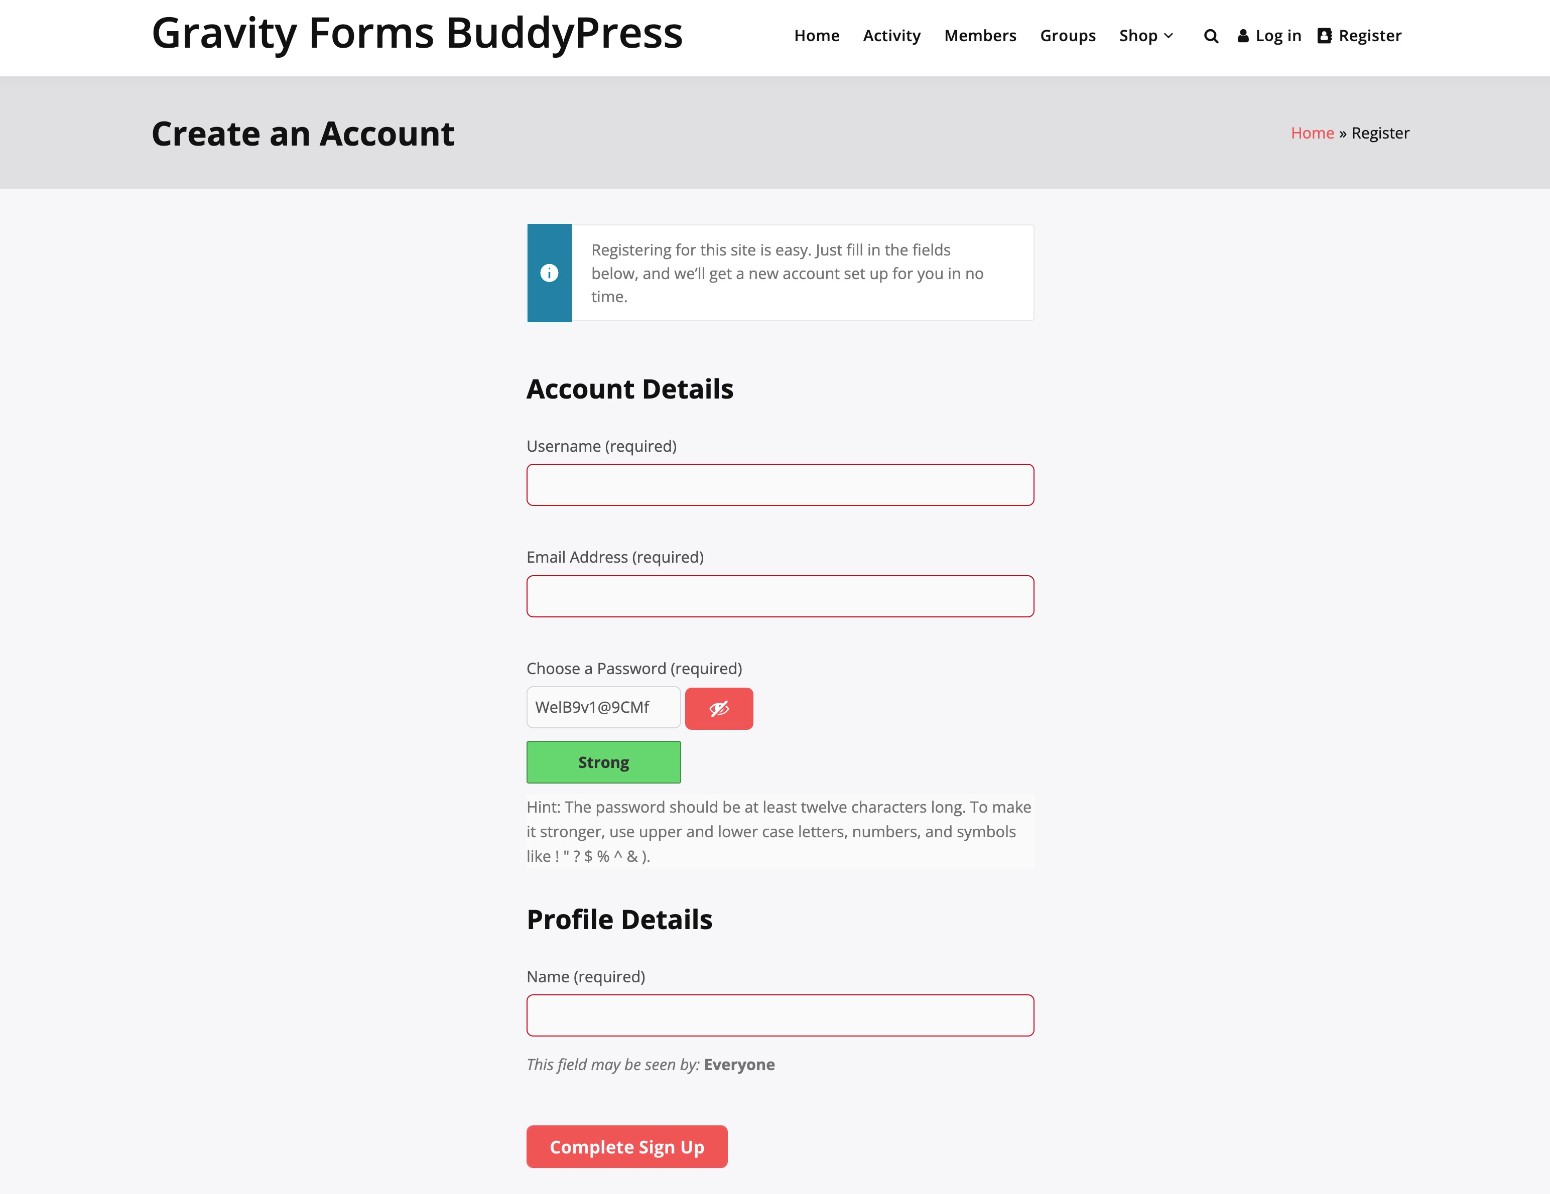 The default BuddyPress registration form before following our Gravity Forms BuddyPress tutorial